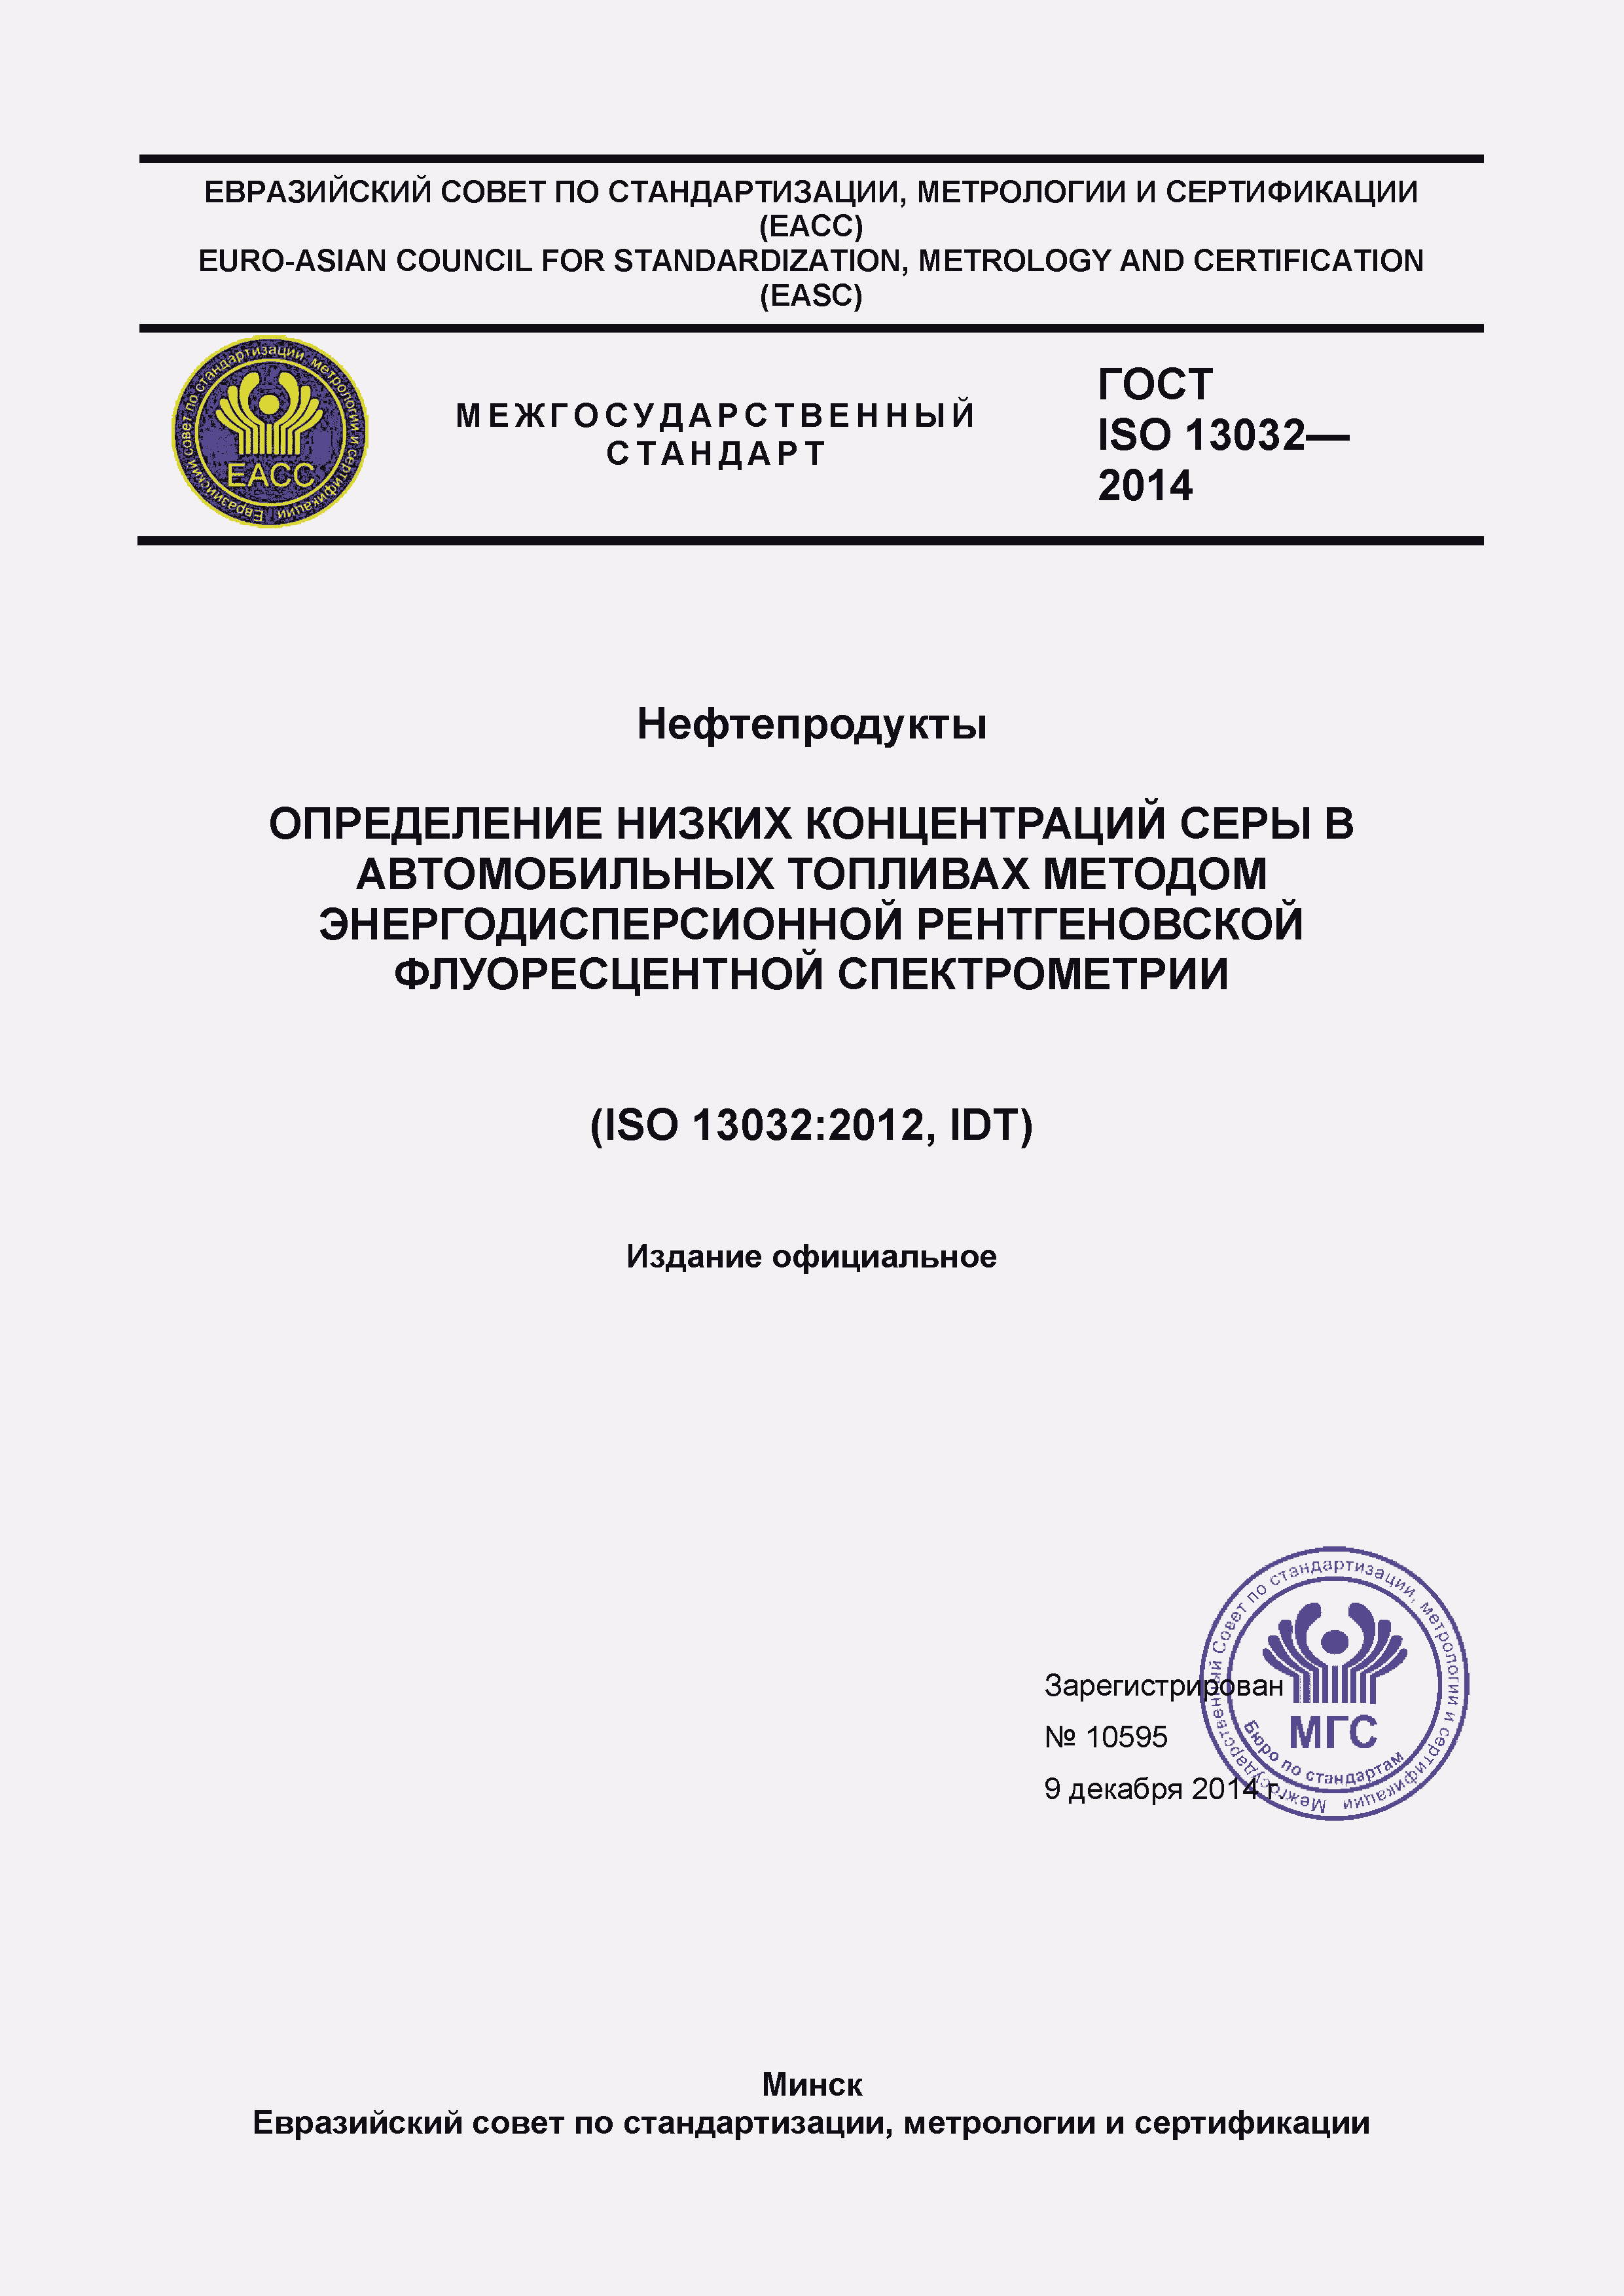  ISO 13032-2014.  1